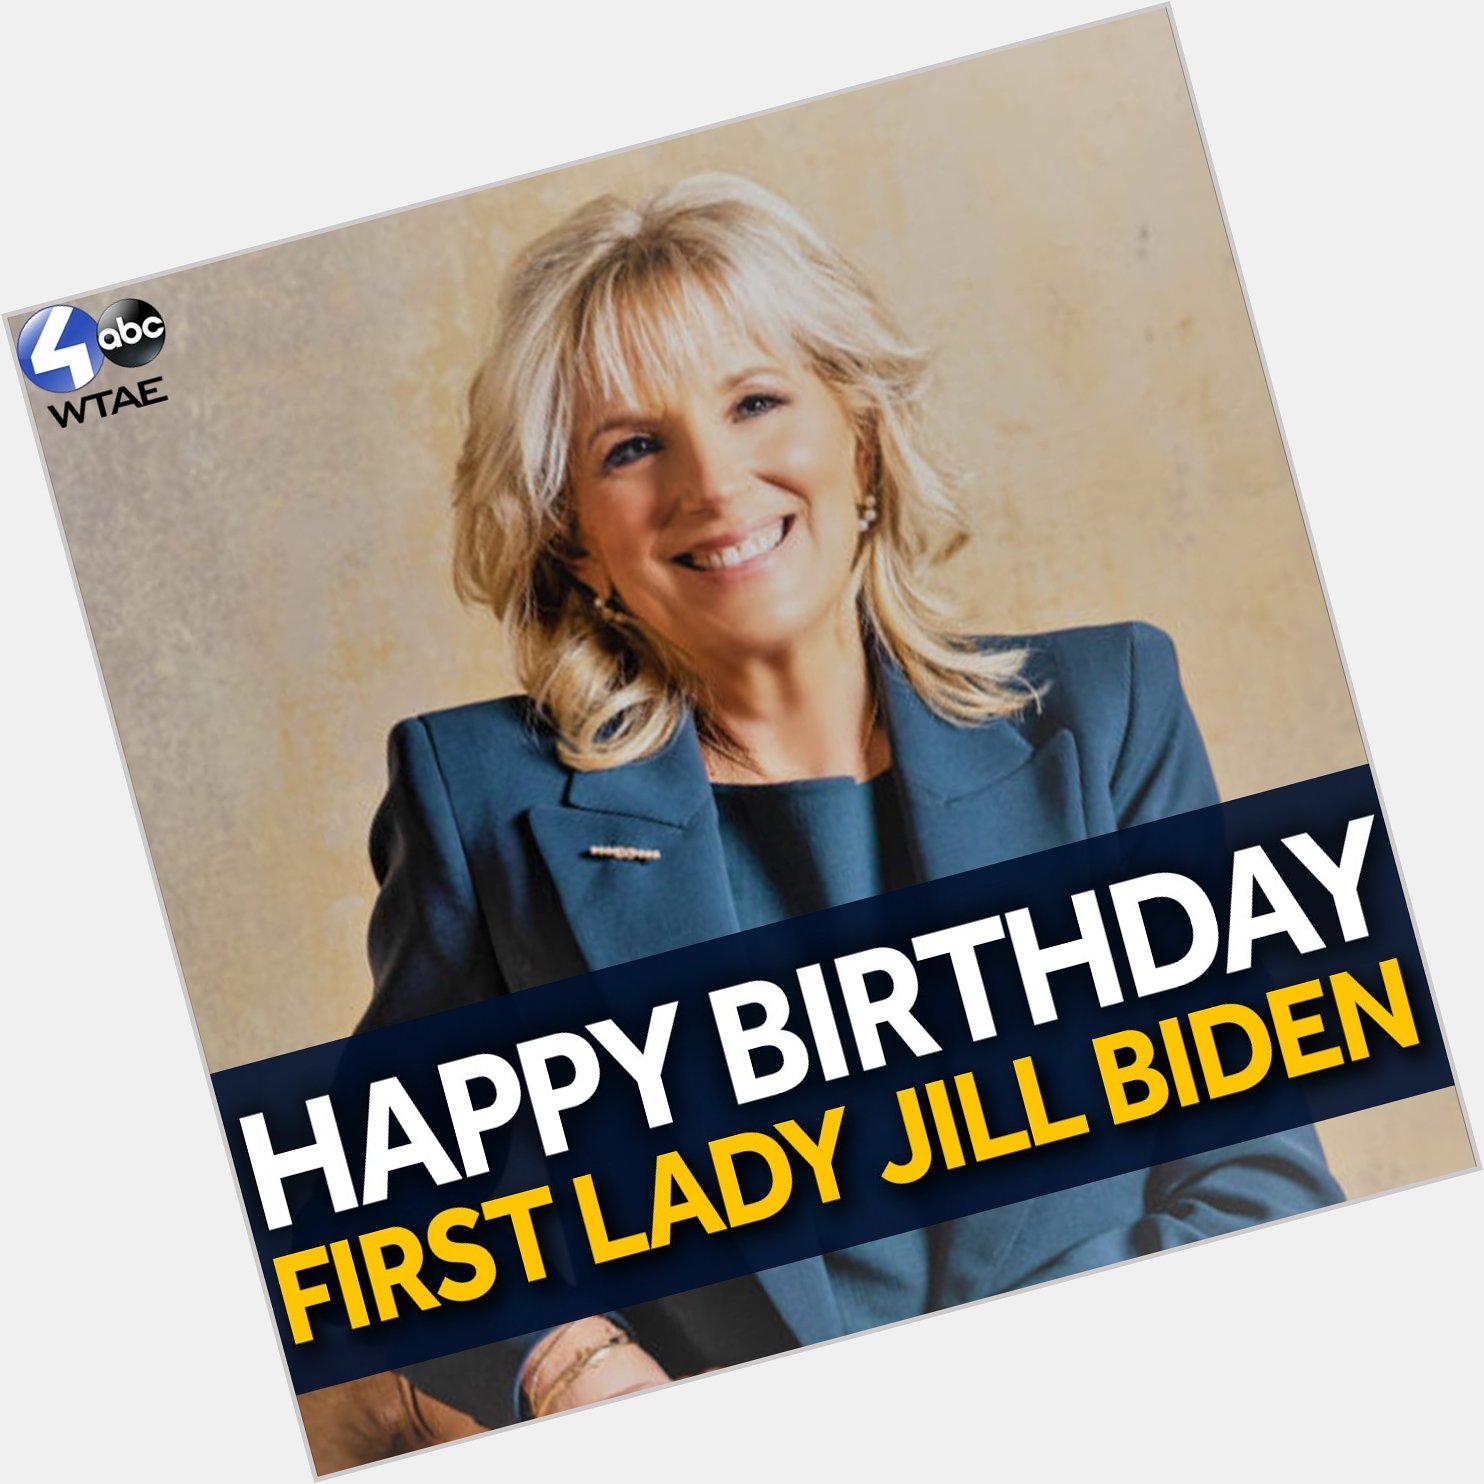 Happy birthday to the first lady! Dr. Jill Biden turns 71 today. 